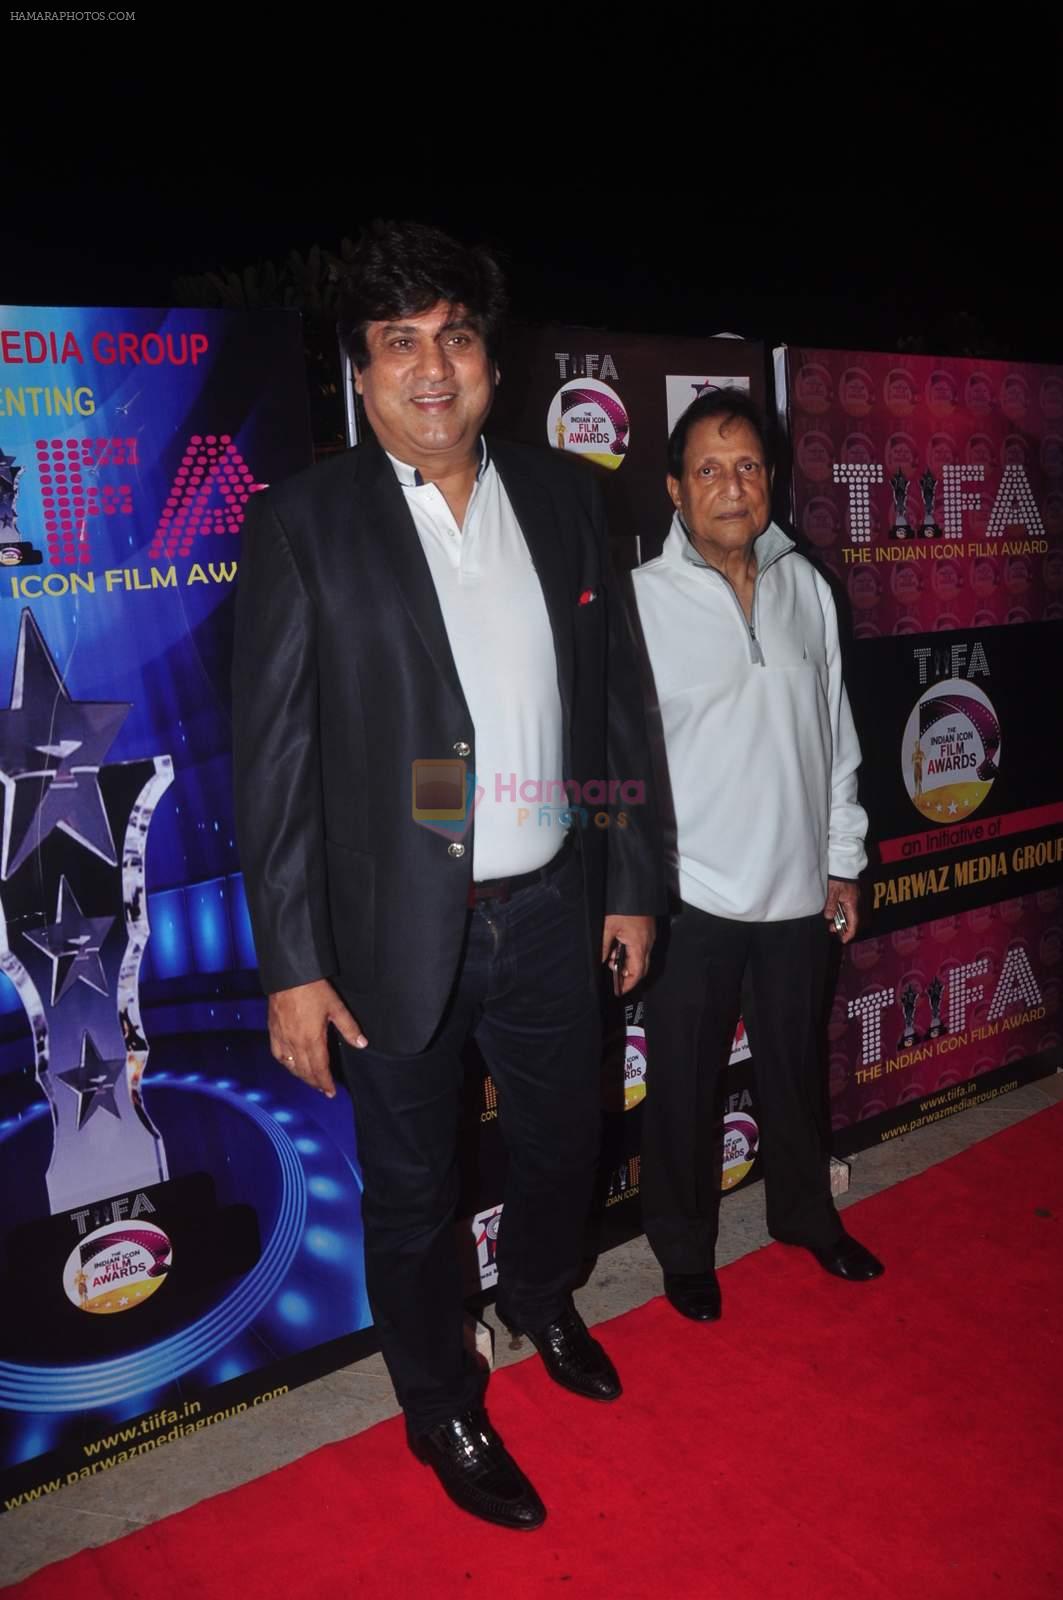 at TIFA Awards in Sun N Sand on 4th Oct 2015